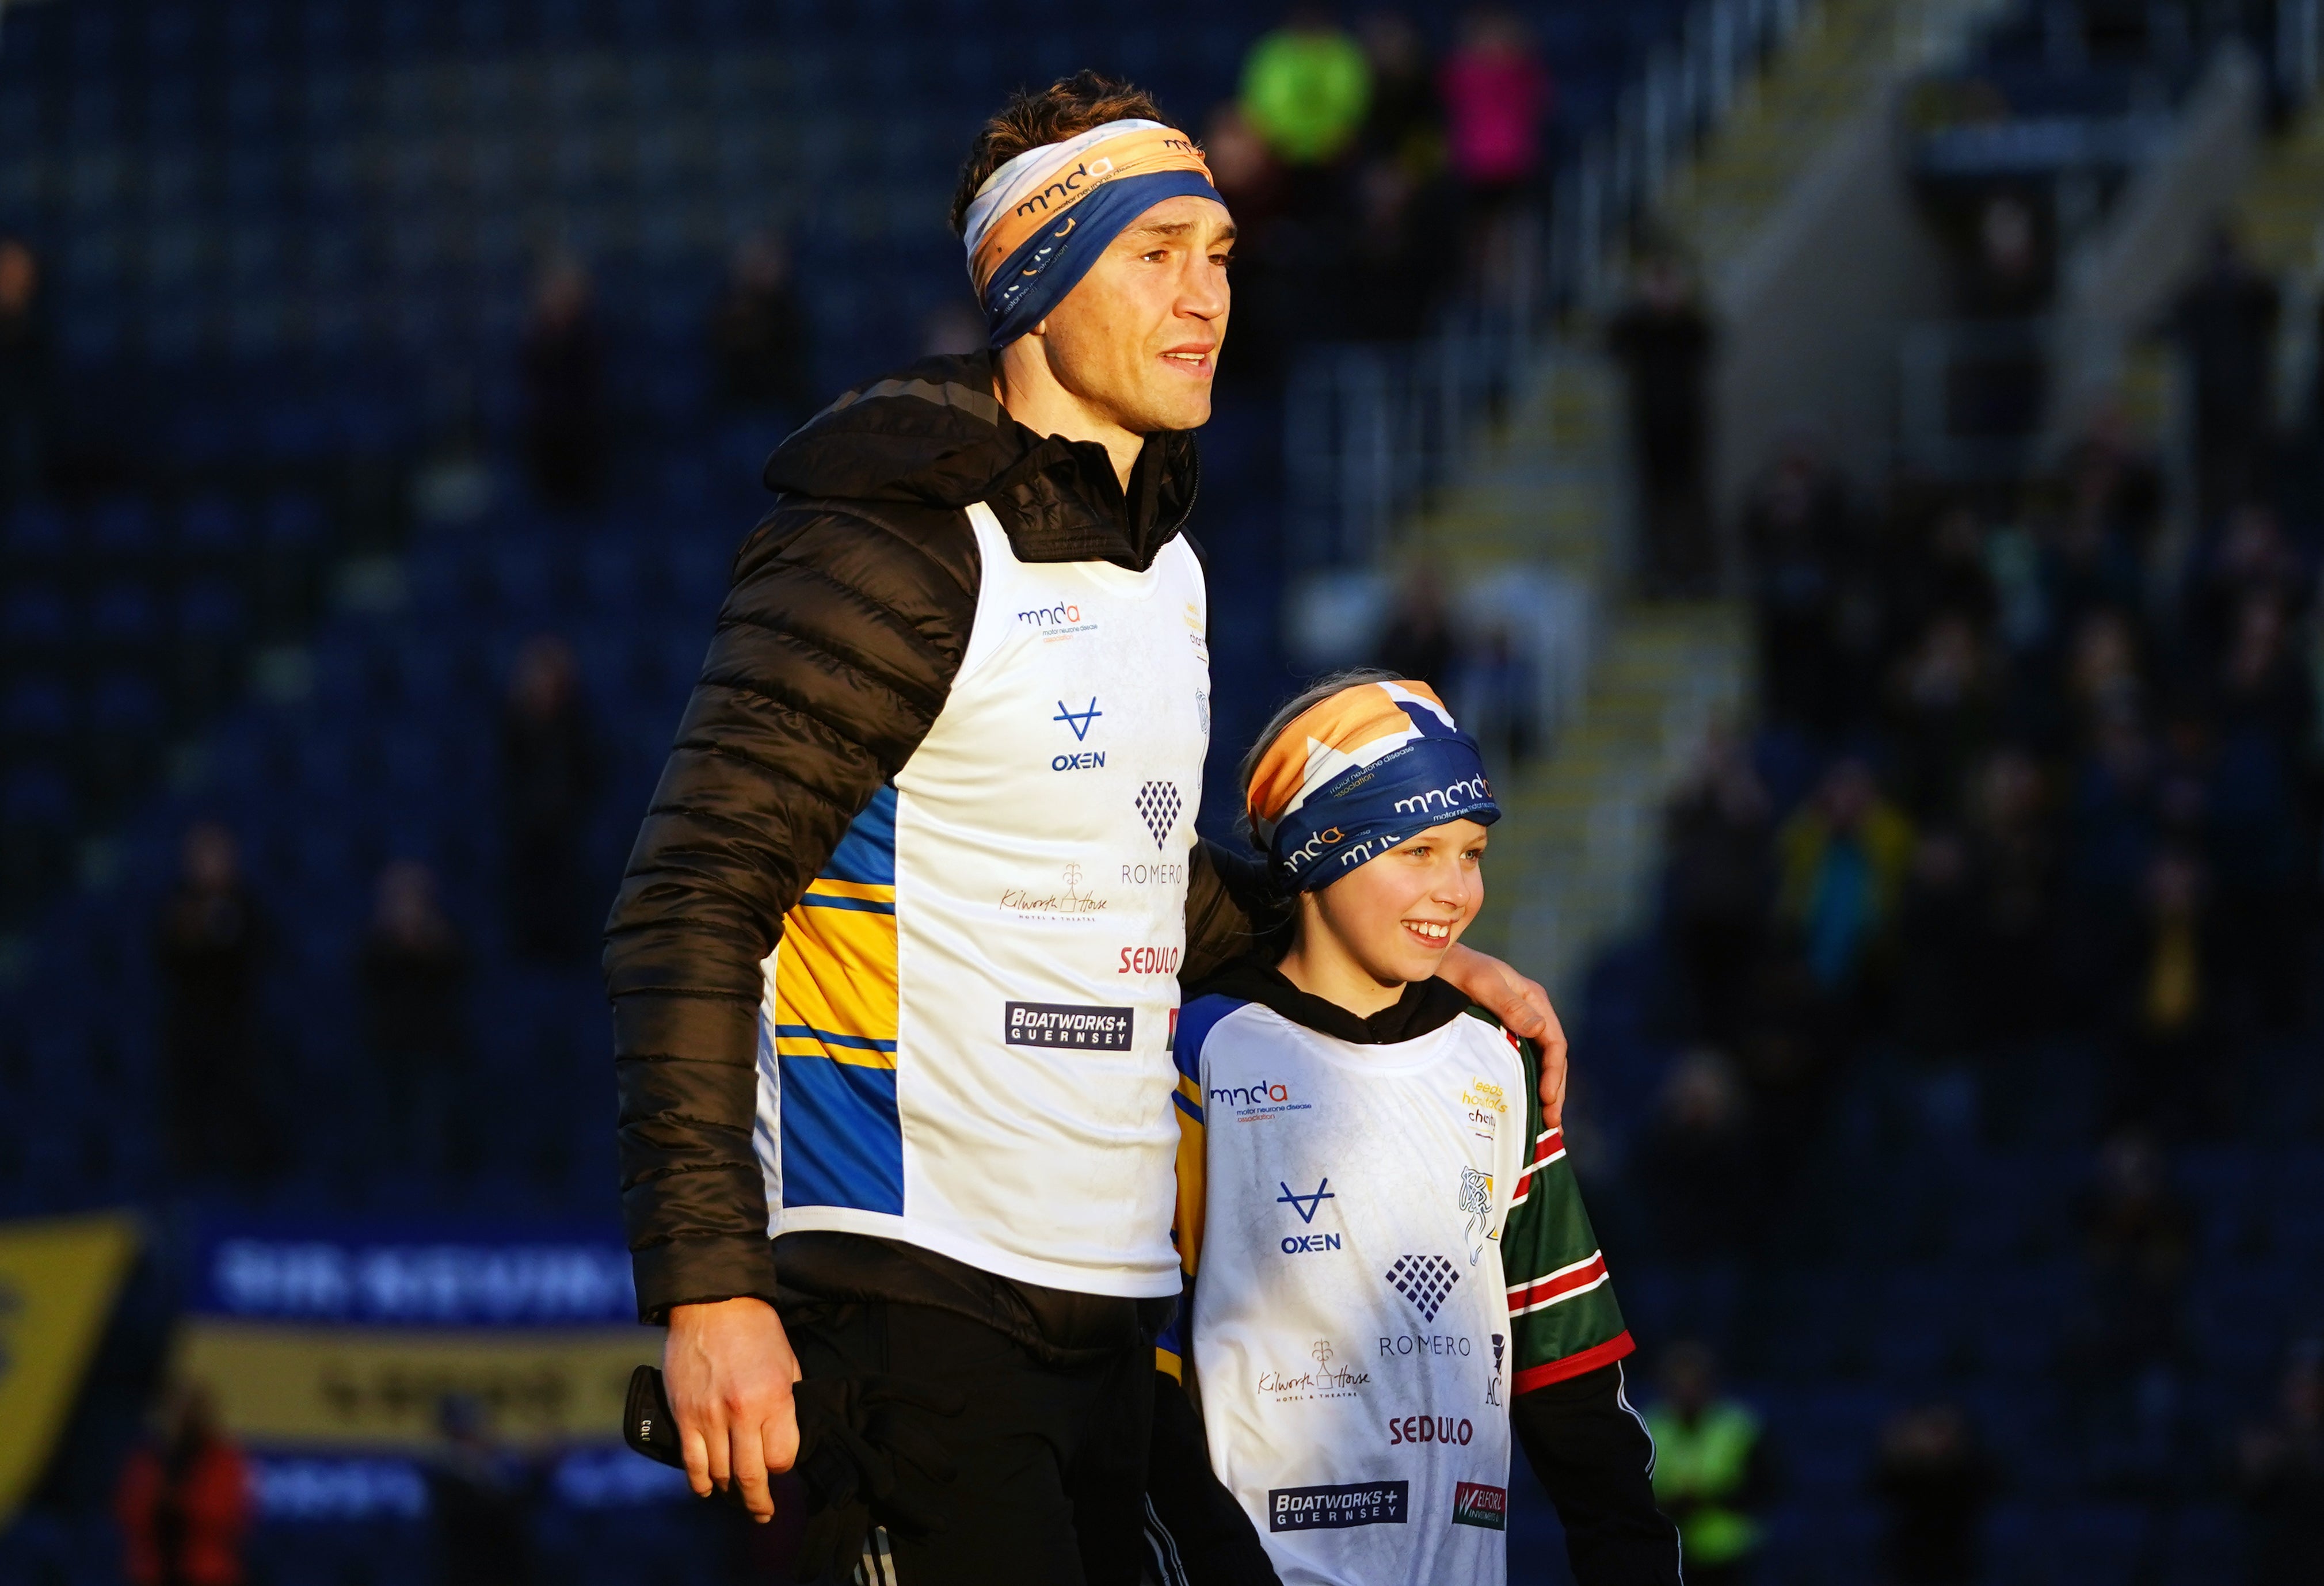 Kevin Sinfield walked into Headingley Stadum with Macy Burrow after completing the Extra Mile Challenge (Zac Goodwin/PA)